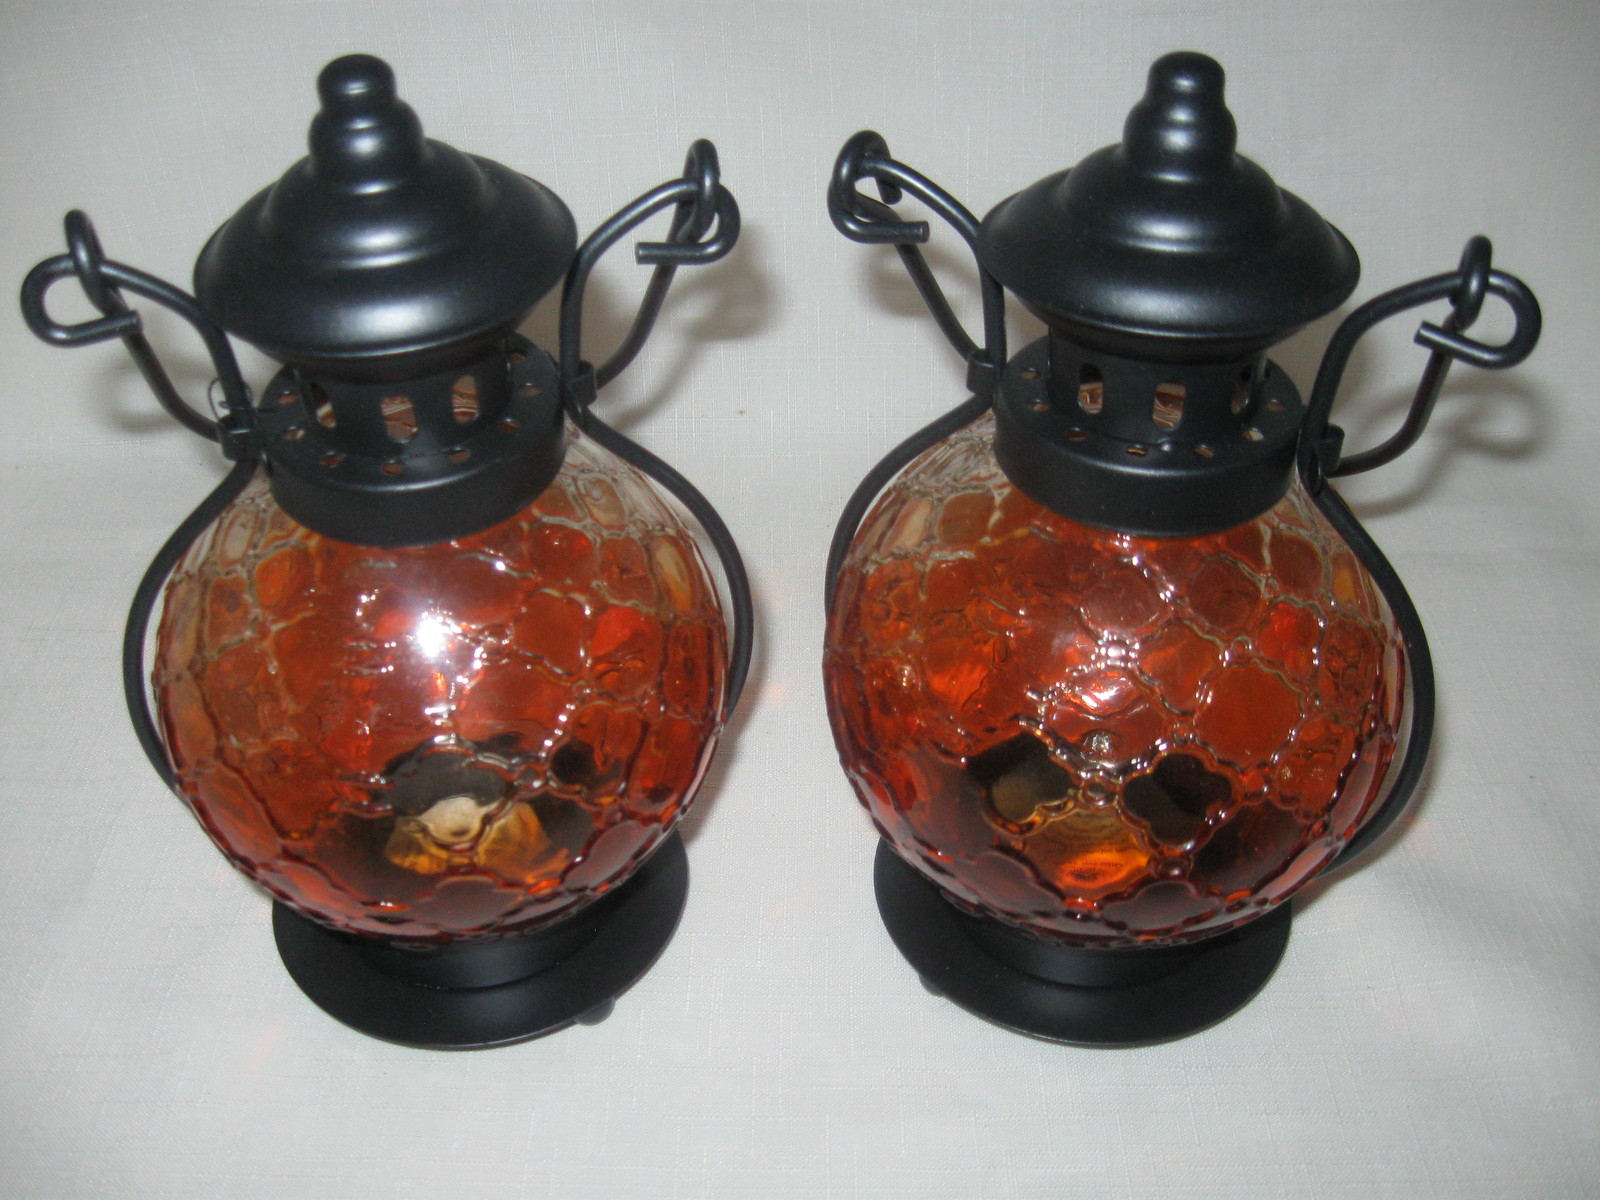 Primary image for  Amber Glass Black Metal Handle  Hurricane Lamp Tea Light Candle Holder Qty 2